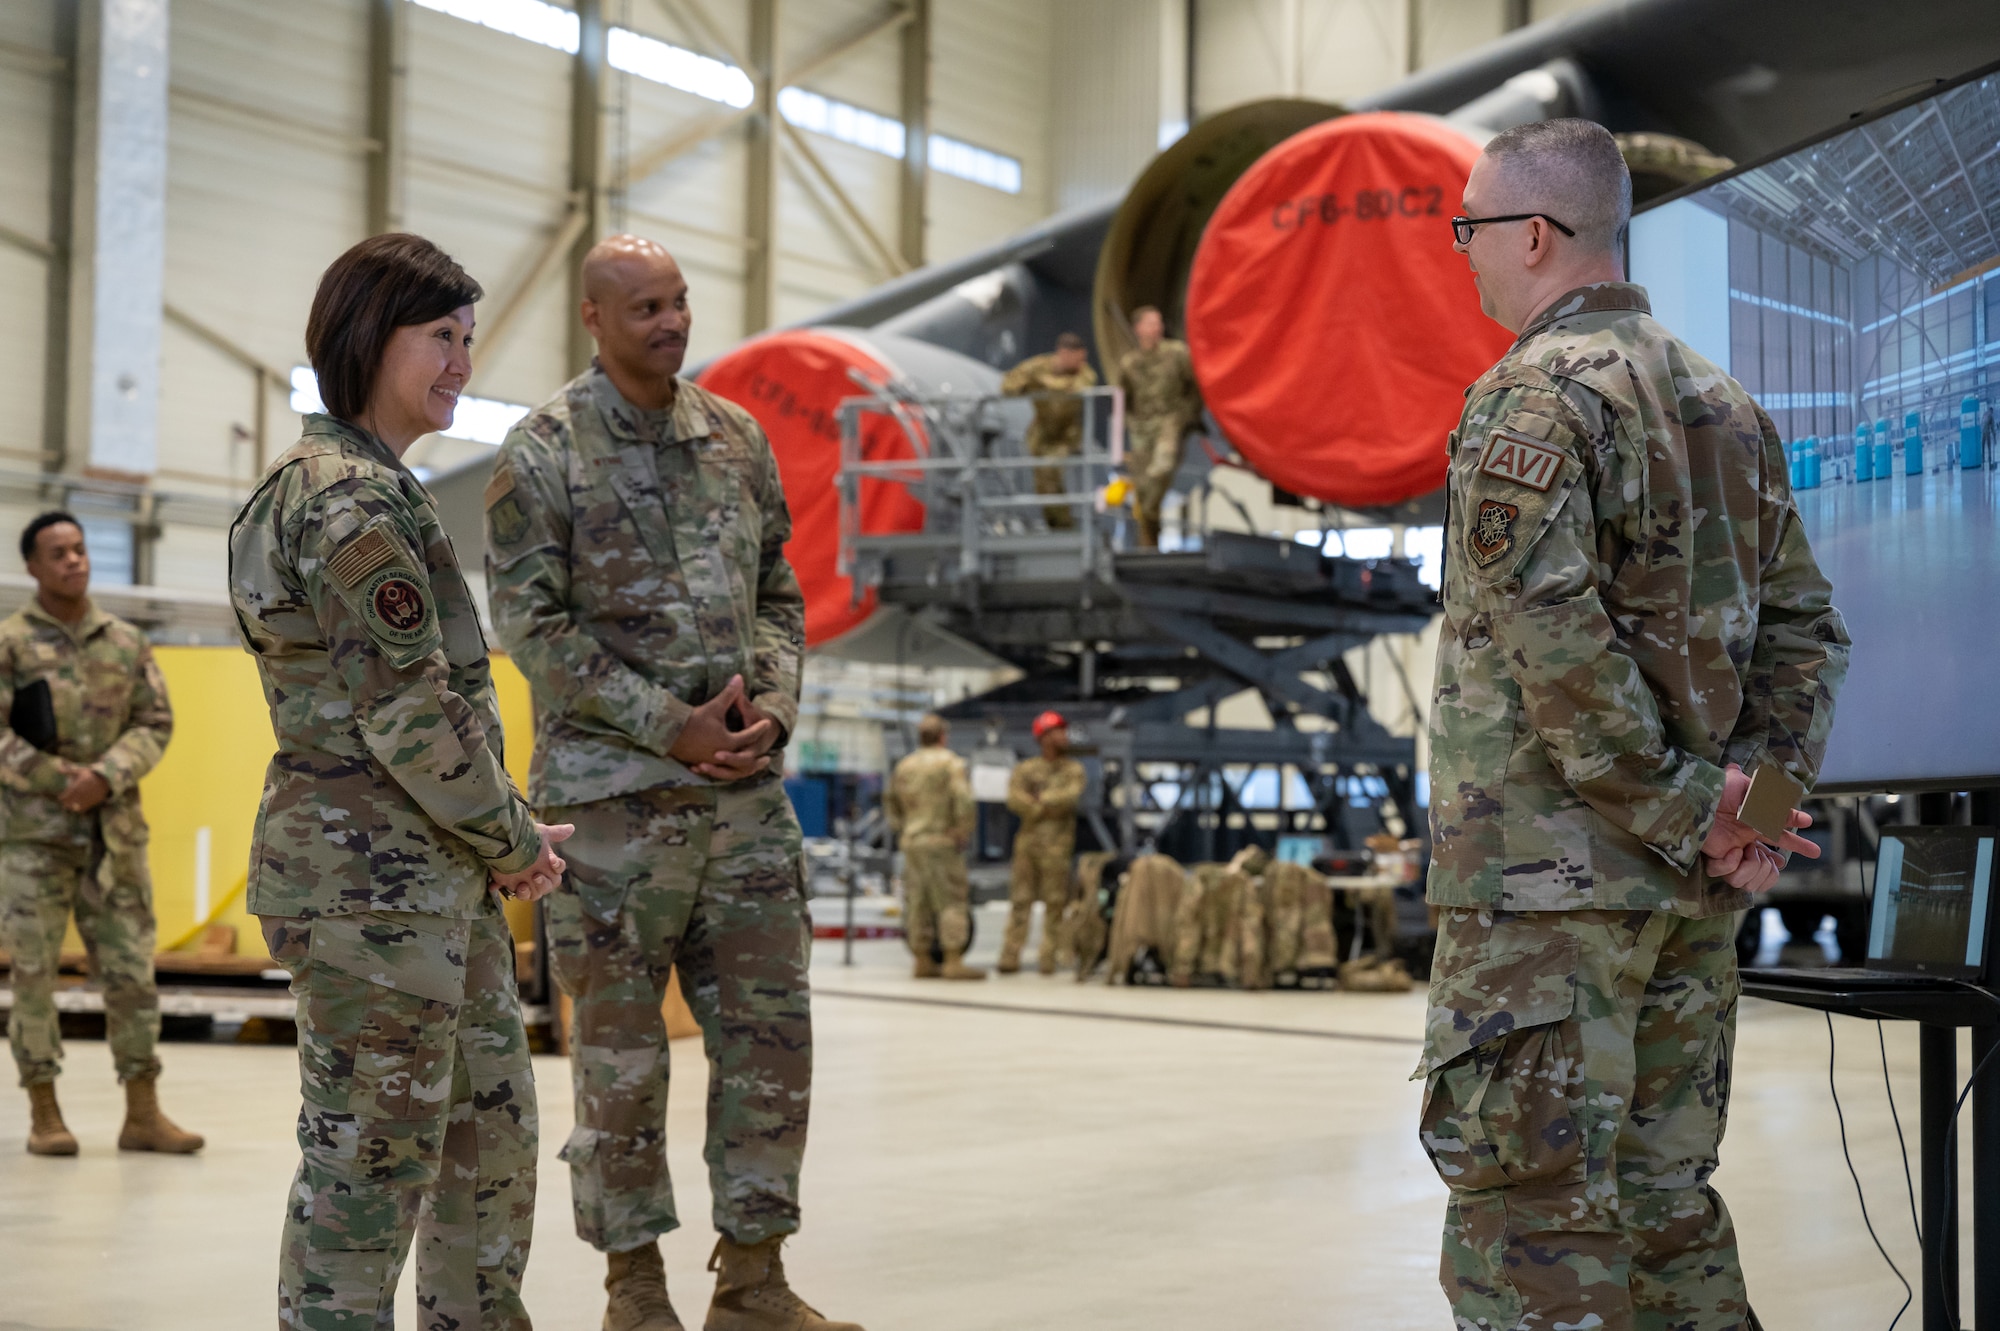 Military members standing in a hangar with an aircraft.